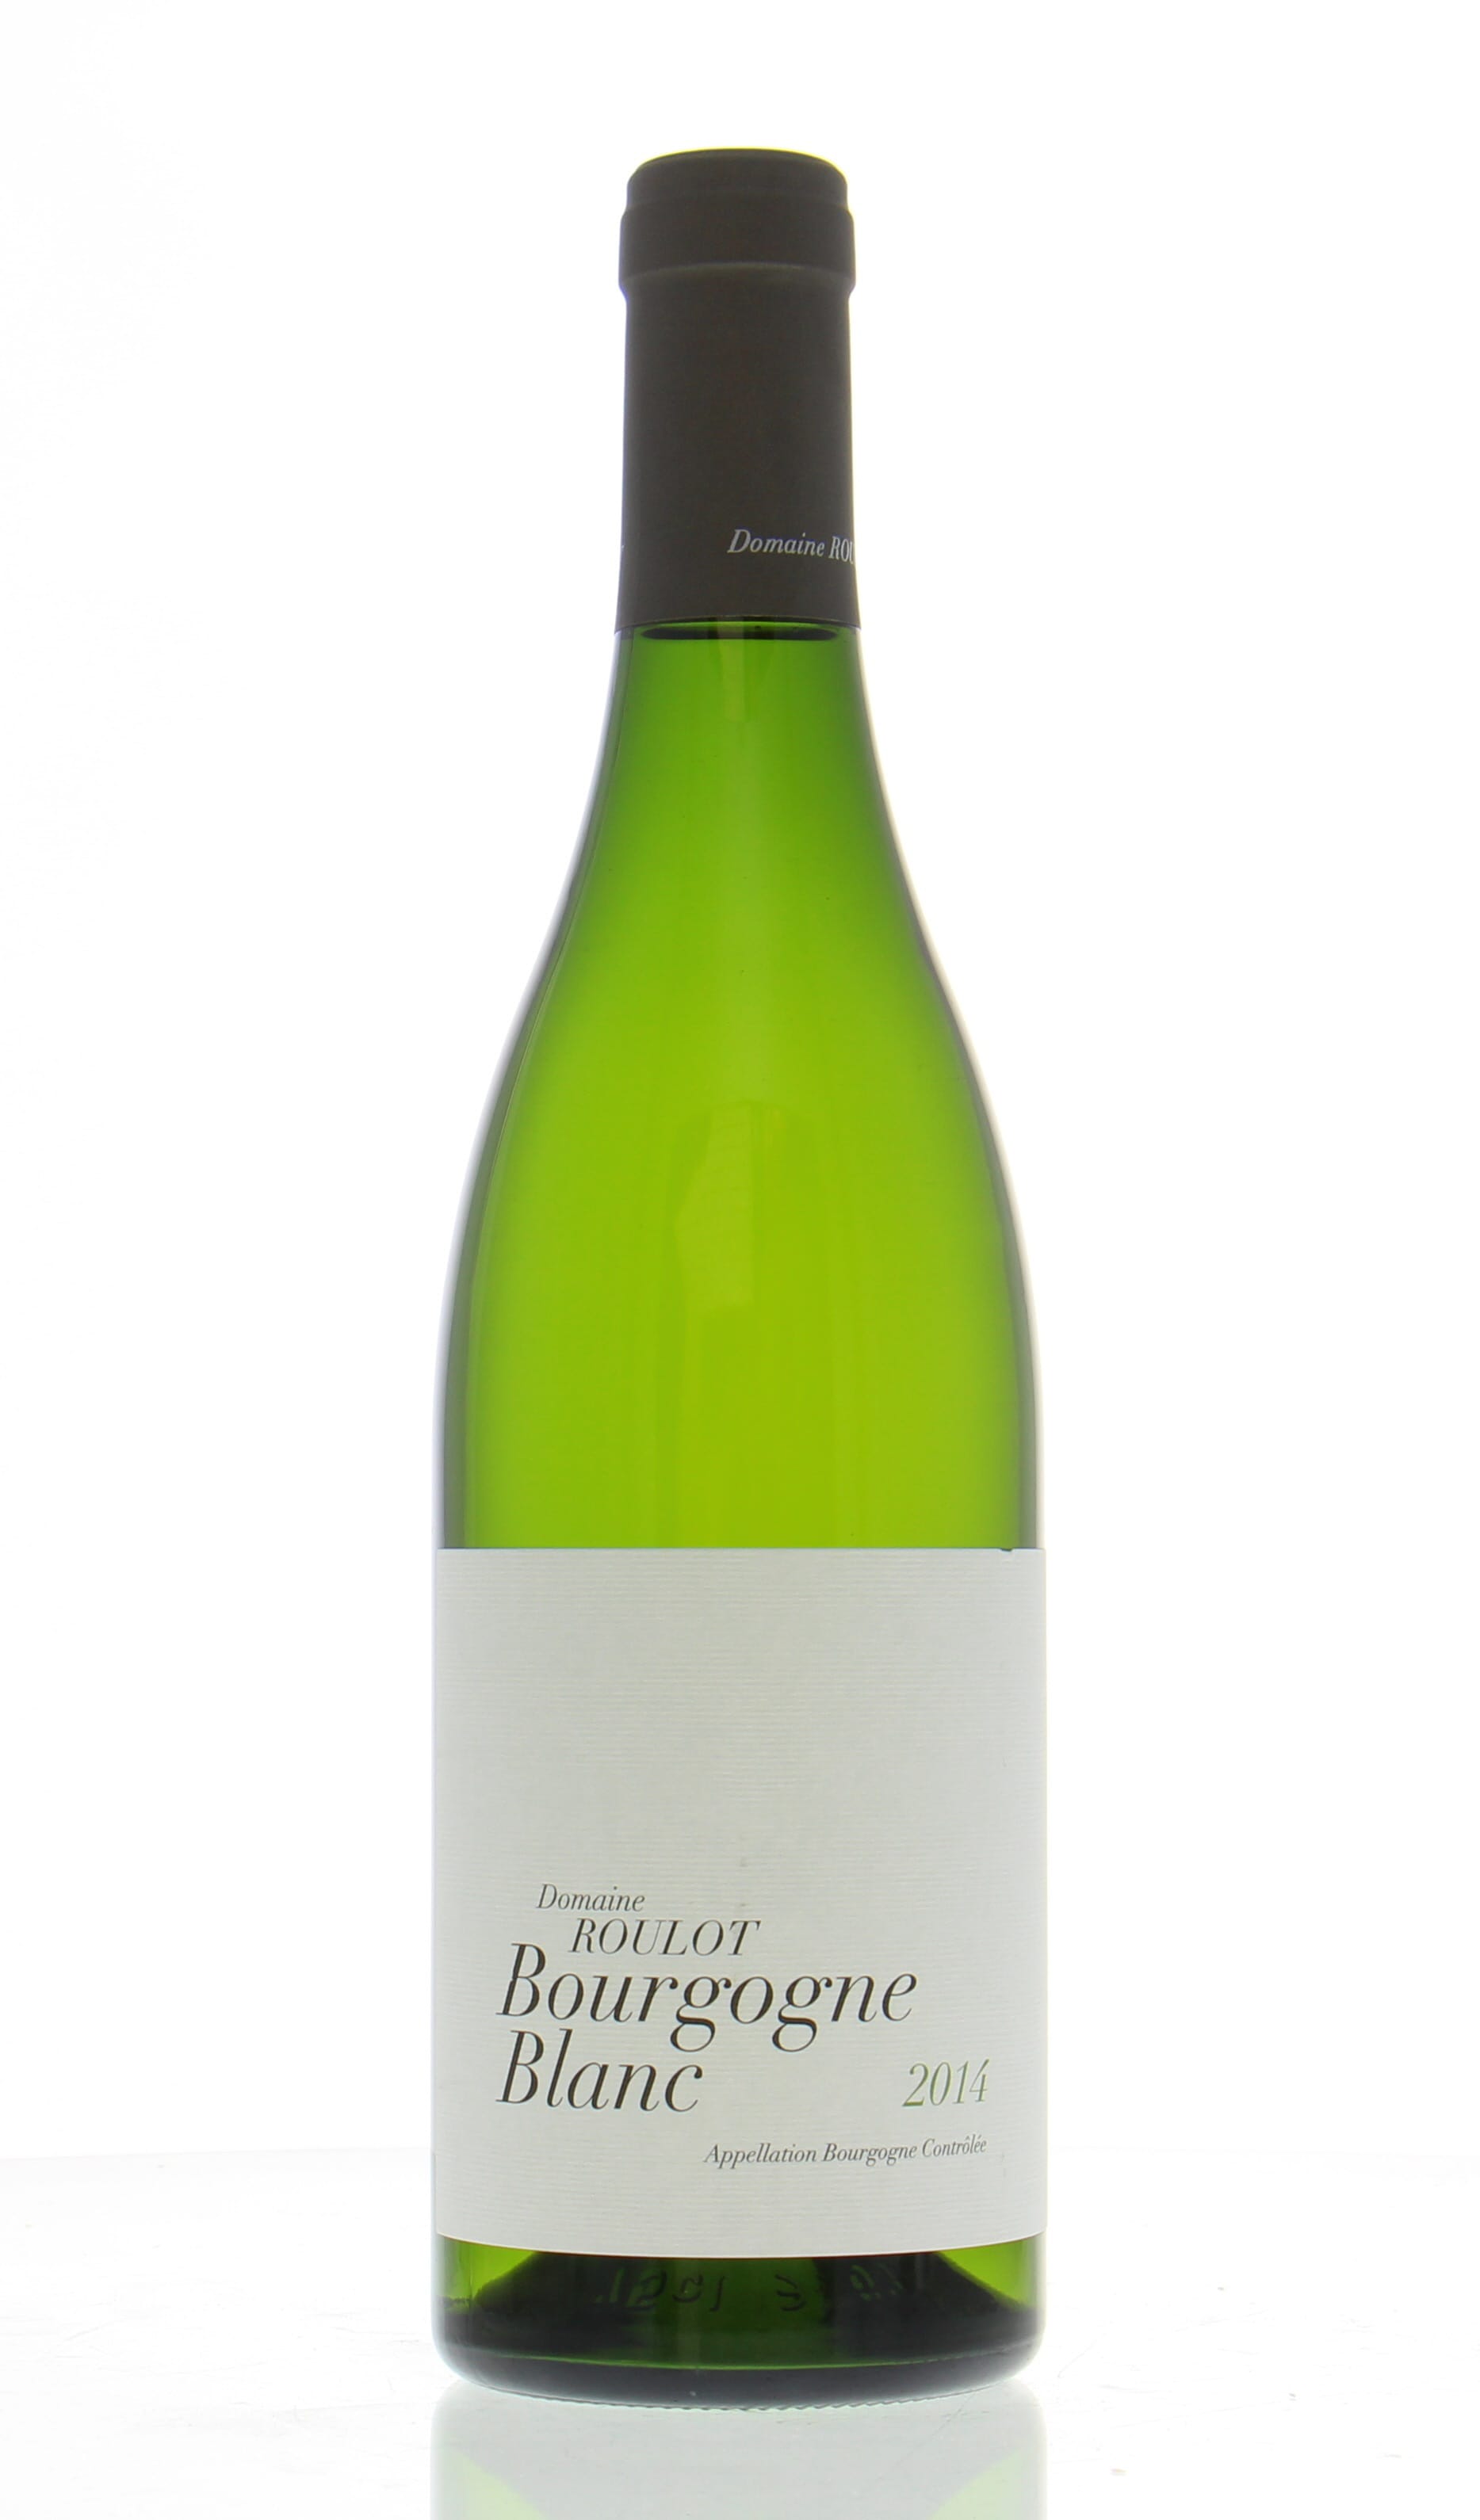 Guy Roulot - Bourgogne Blanc 2014 Perfect